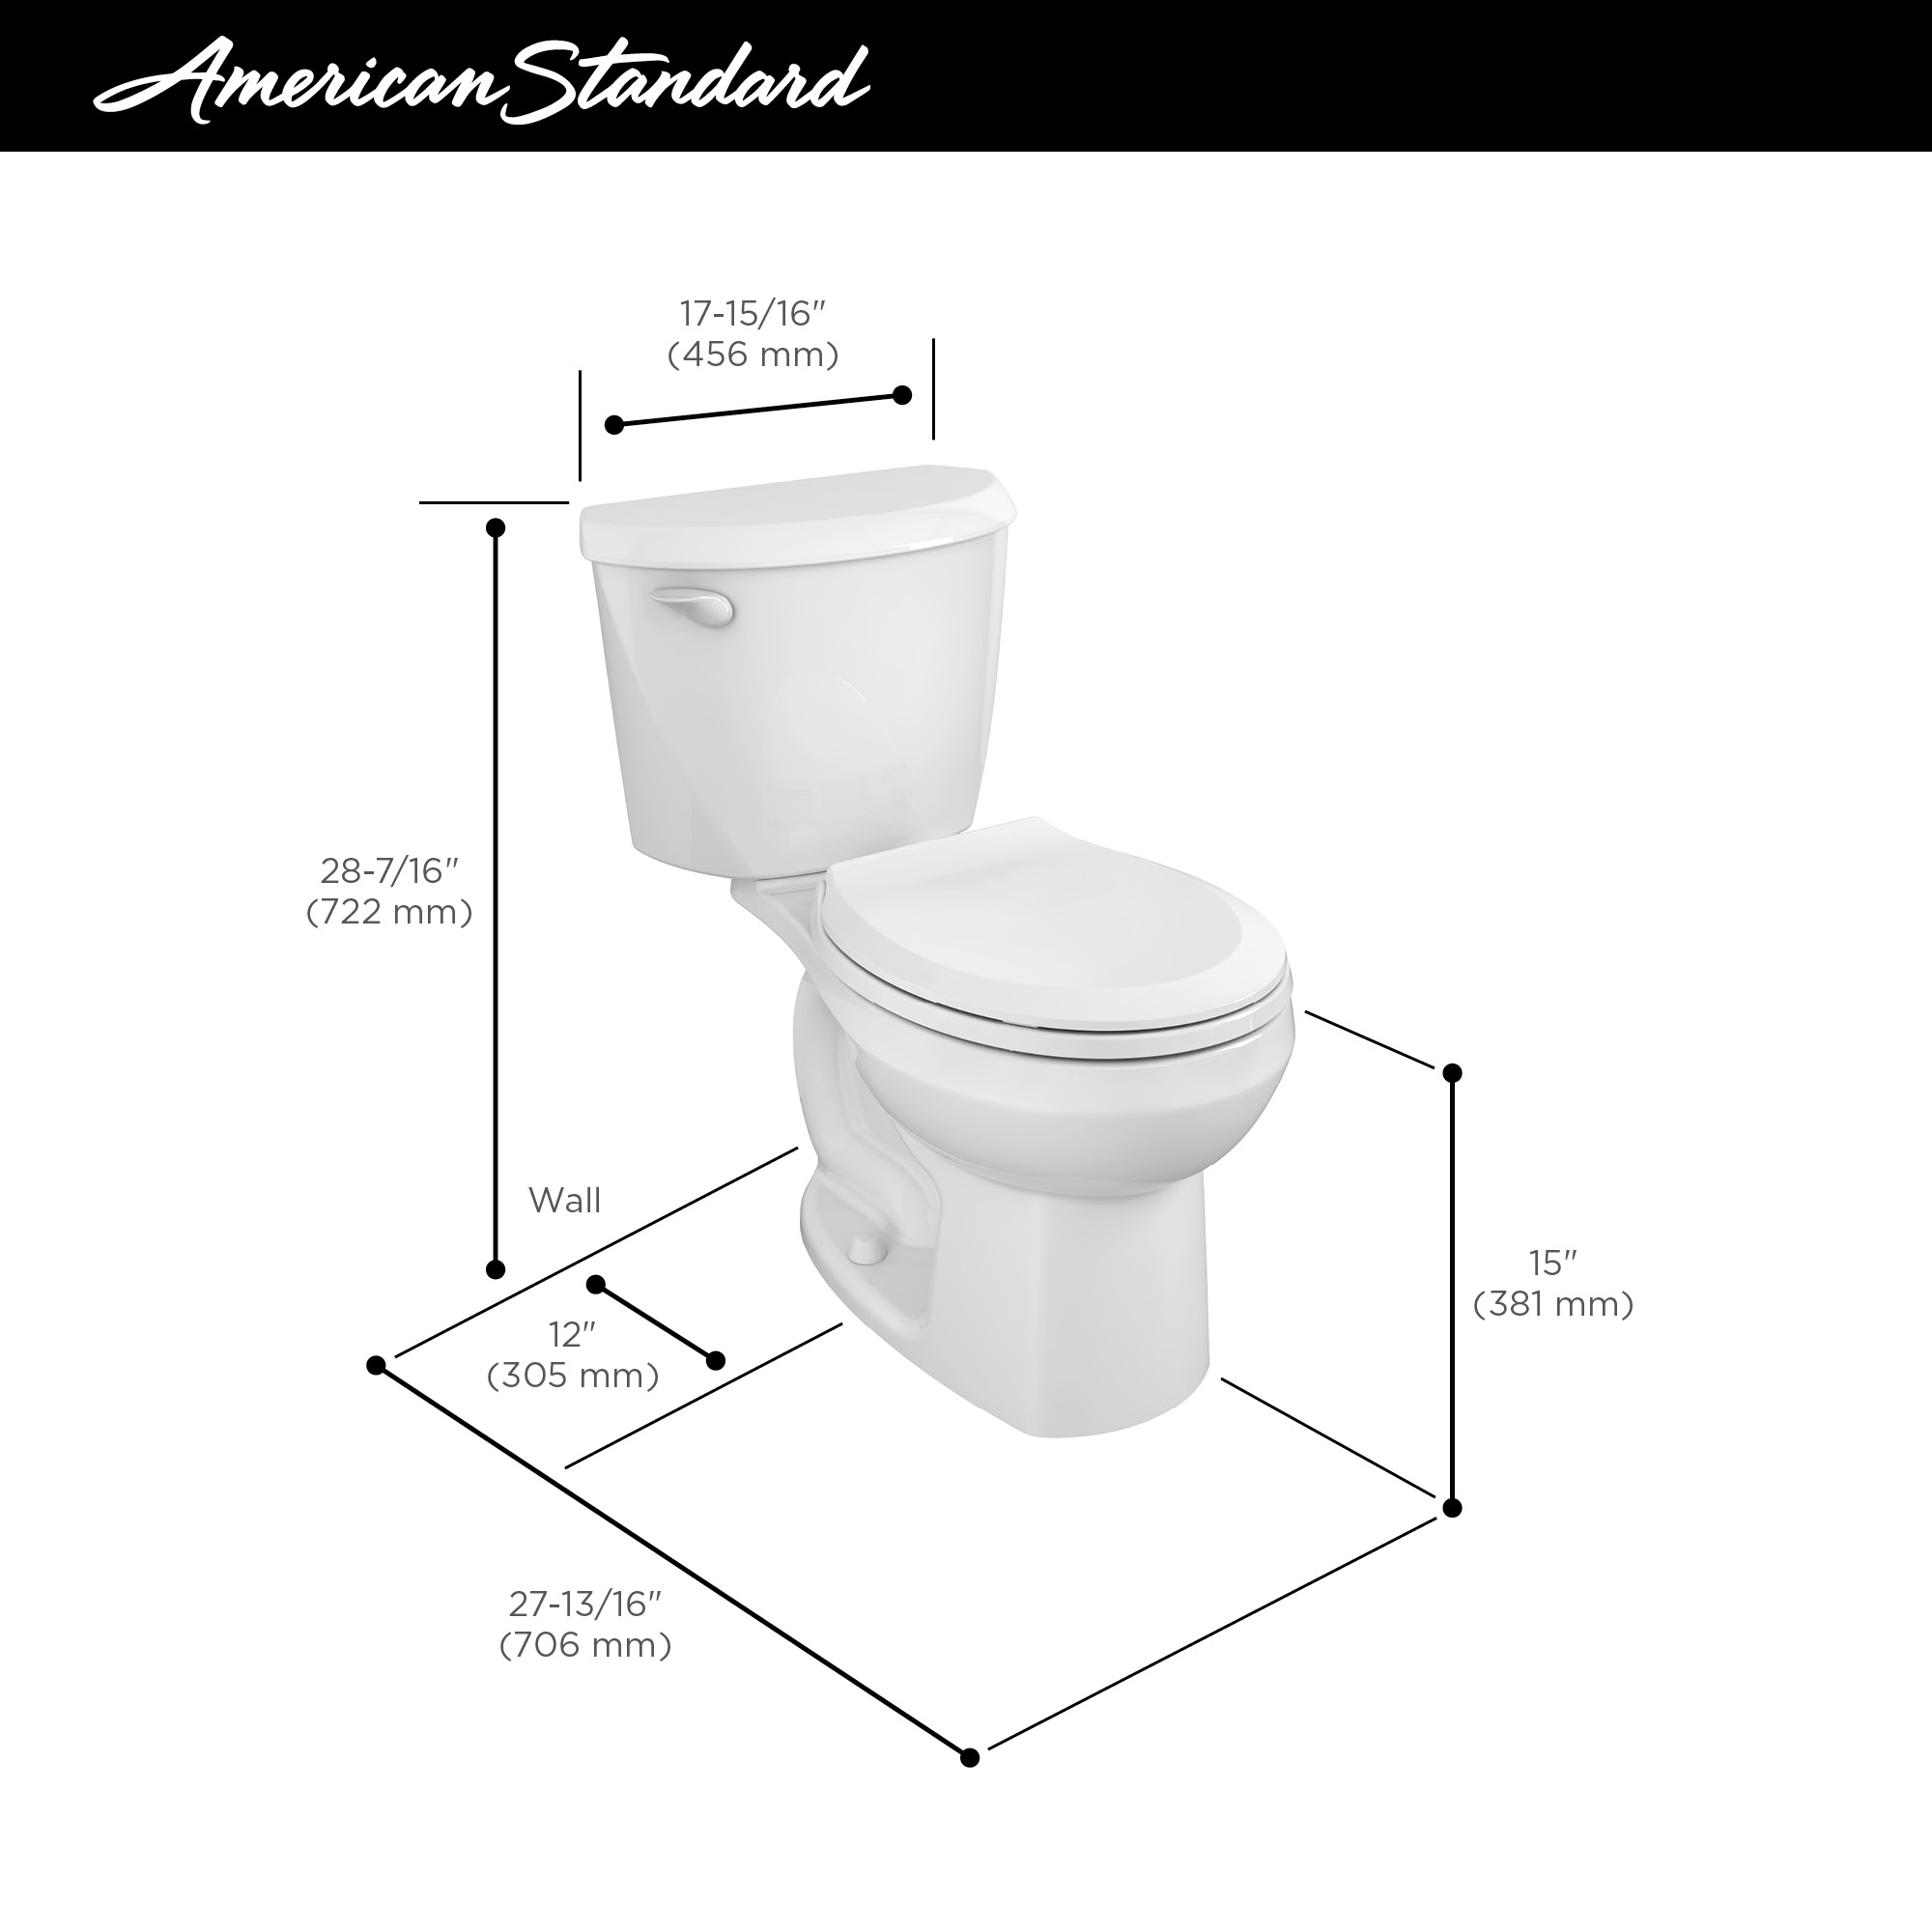 Colony®3 Two-Piece 1.28 gpf/4.8 Lpf Standard Height Round-Front Toilet Less Seat